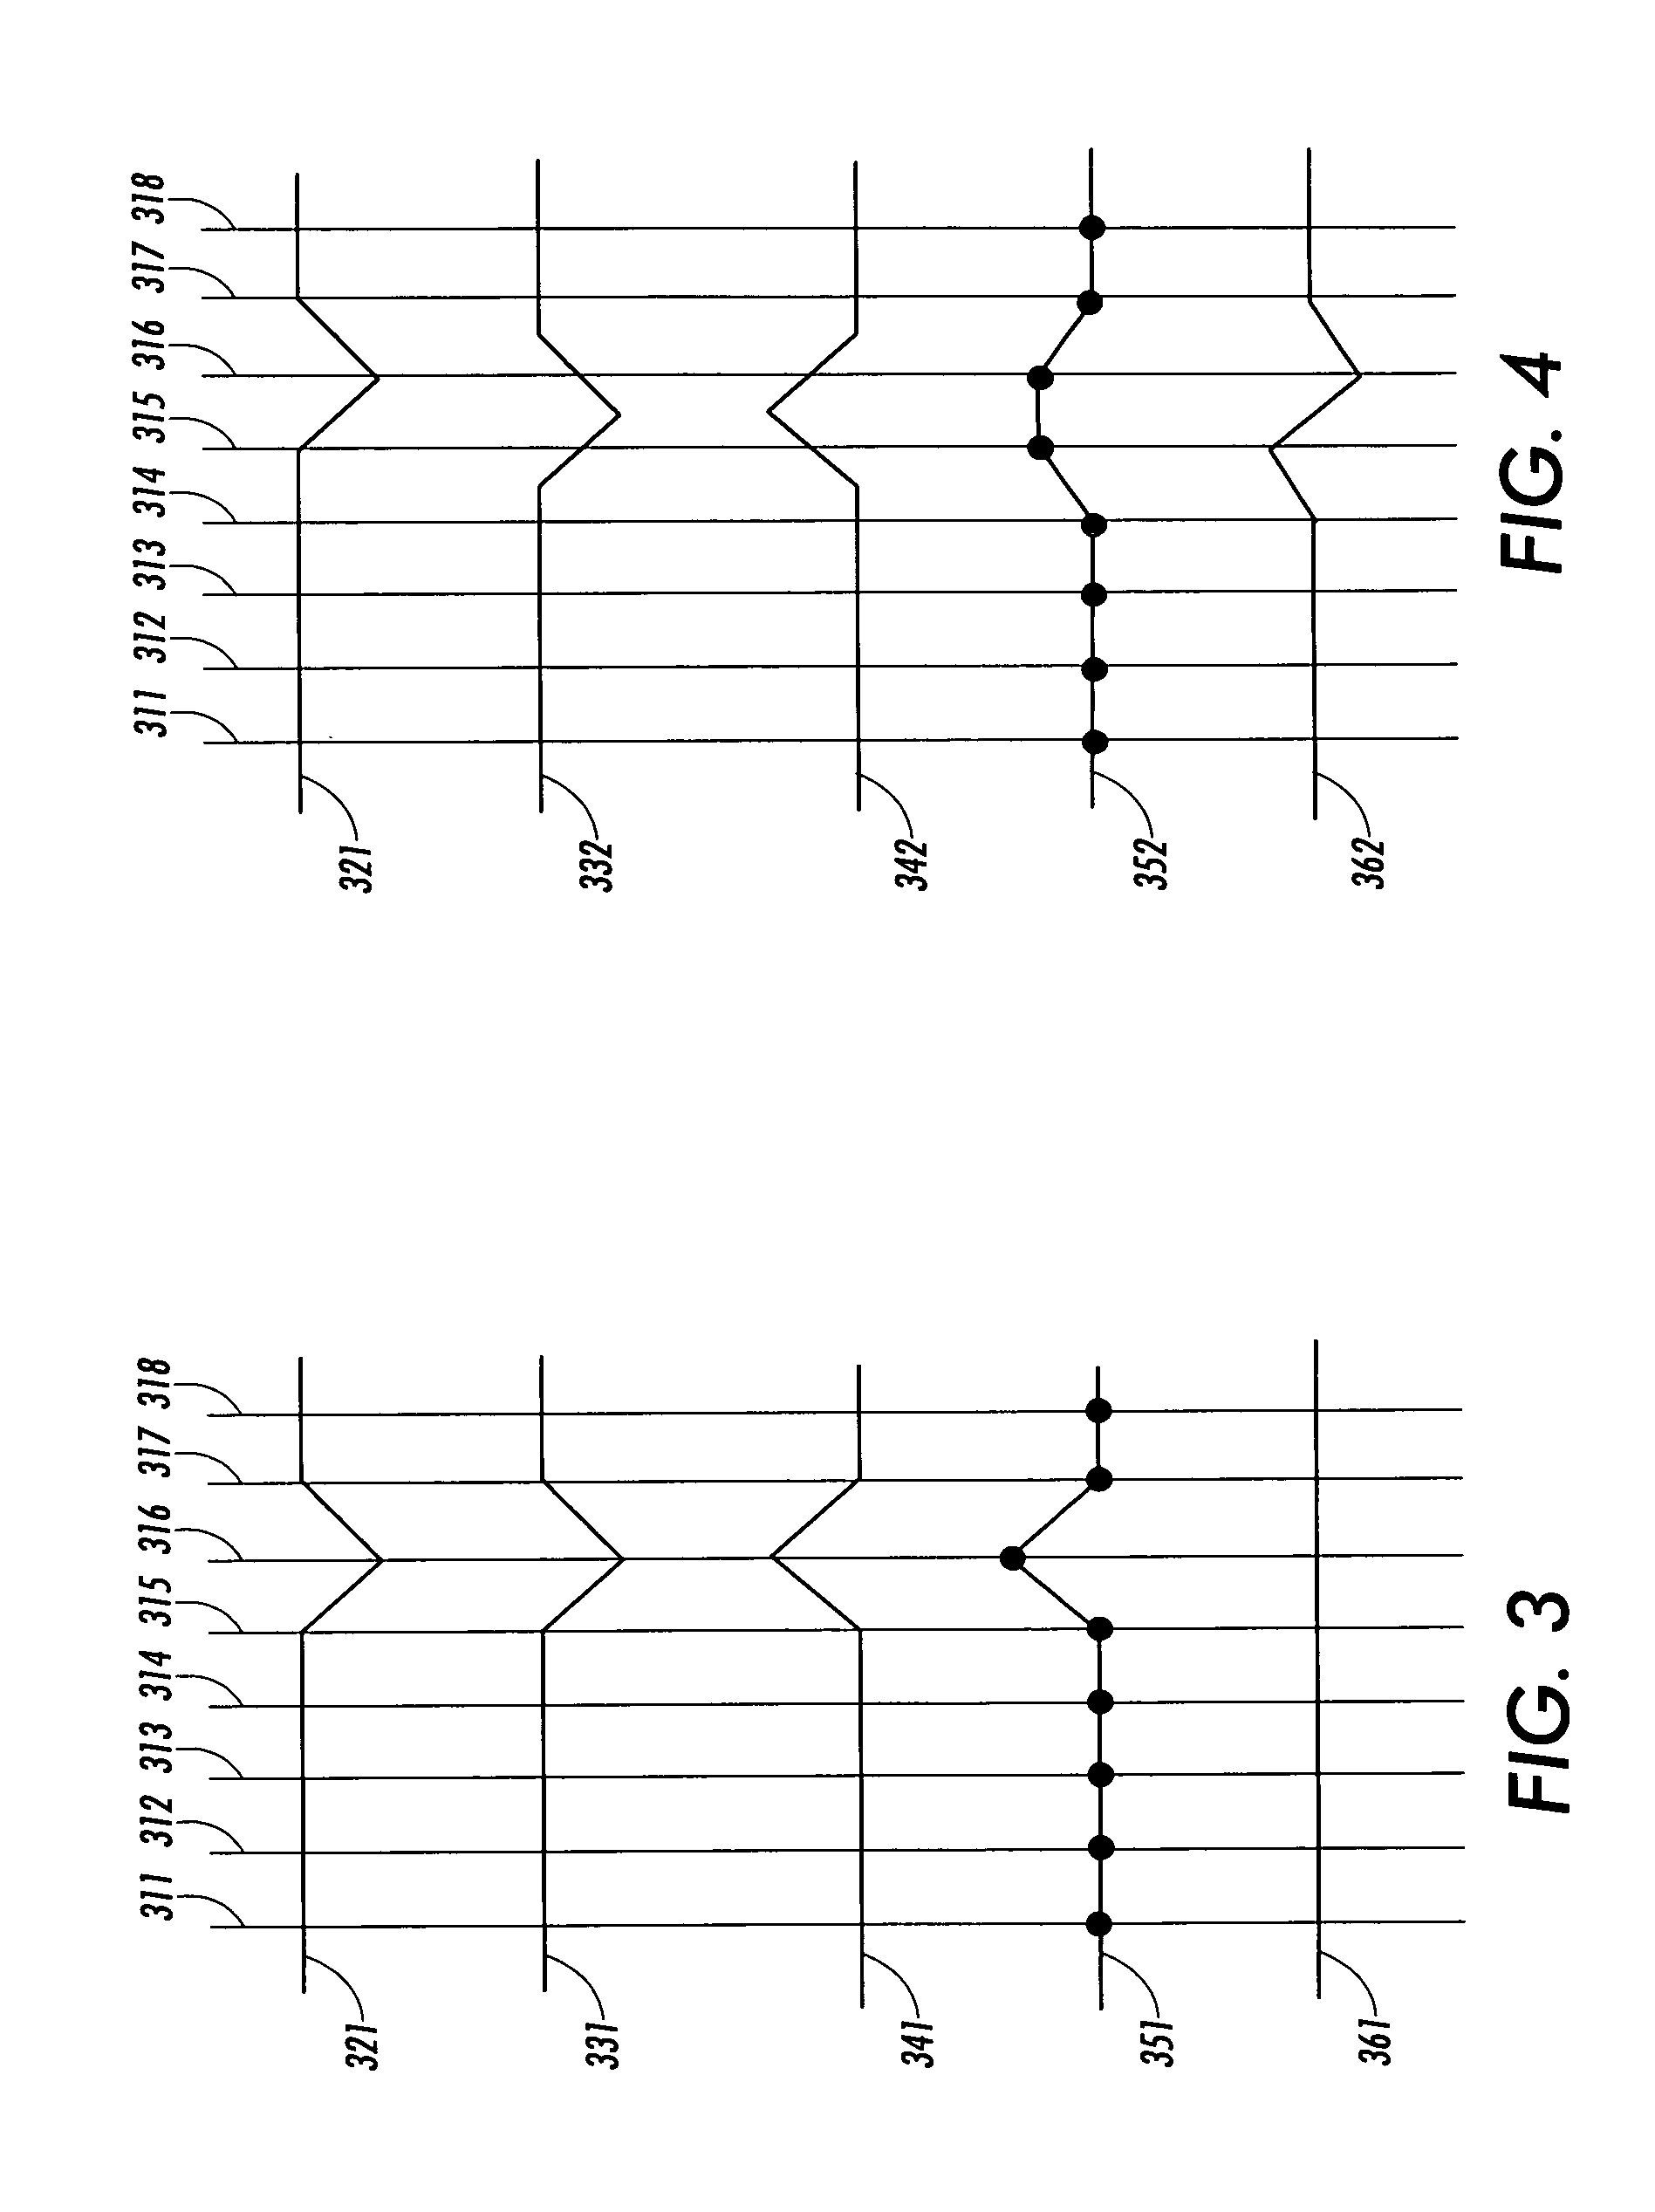 System and methods for compensating for streaks in images